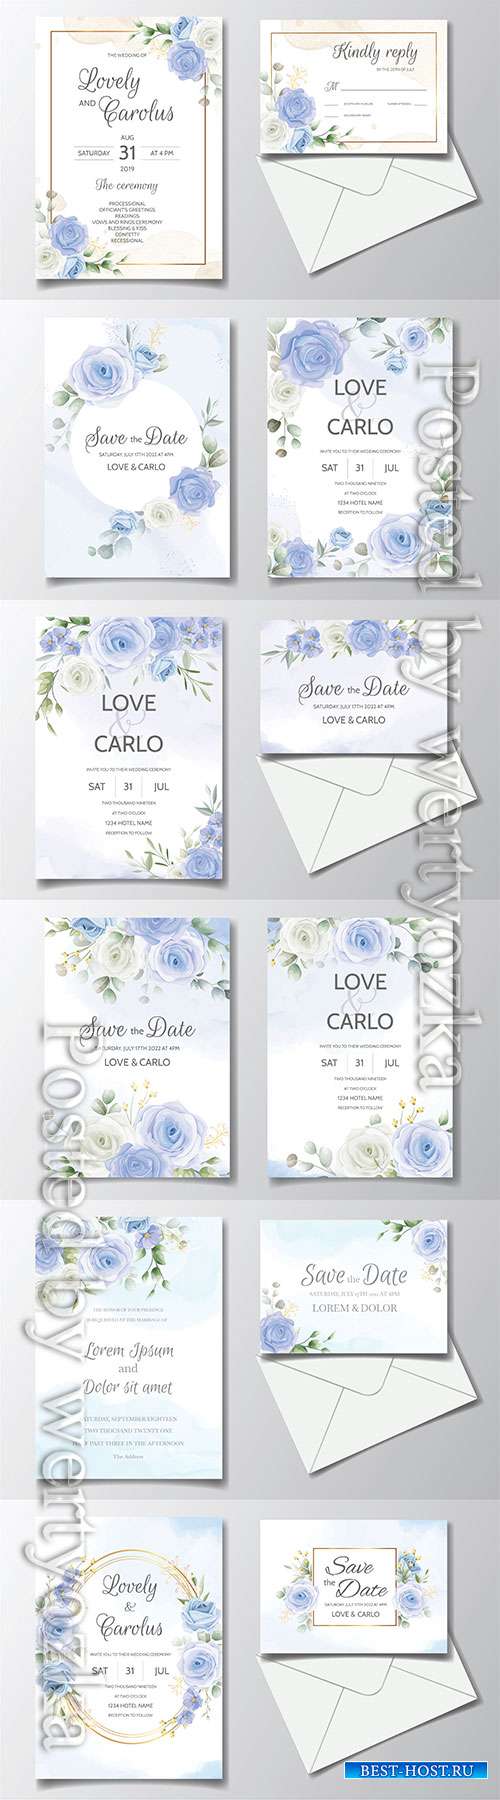 Vintage wedding invitation with blue roses in vector